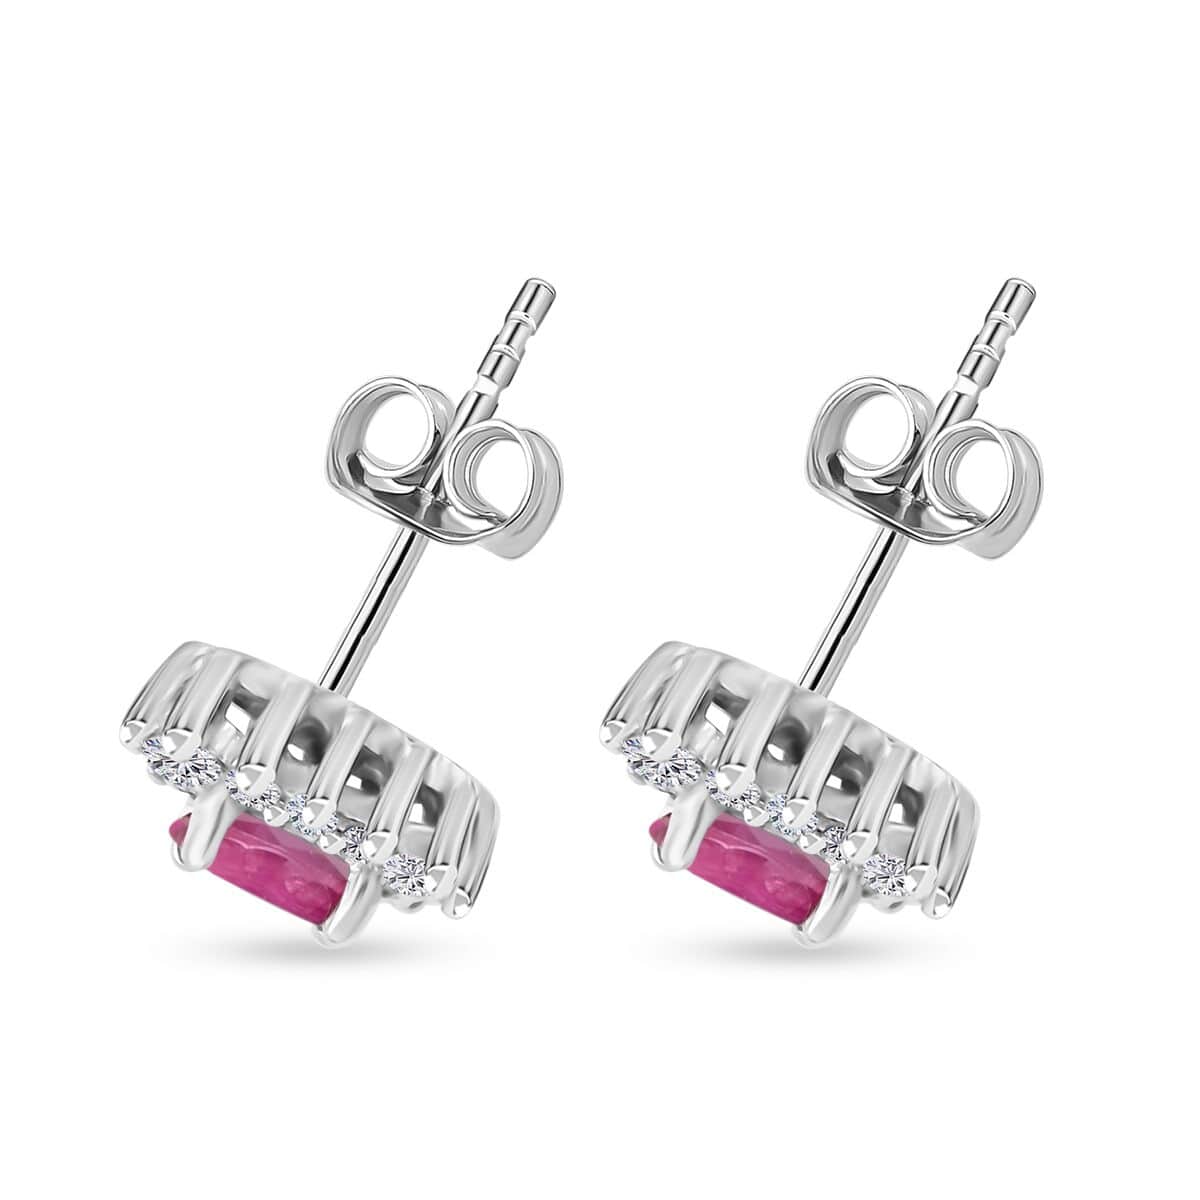 Premium Mozambique Ruby and White Zircon Sunburst Stud Earrings in Platinum Over Sterling Silver 1.10 ctw (Del. in 8-10 Days) image number 3